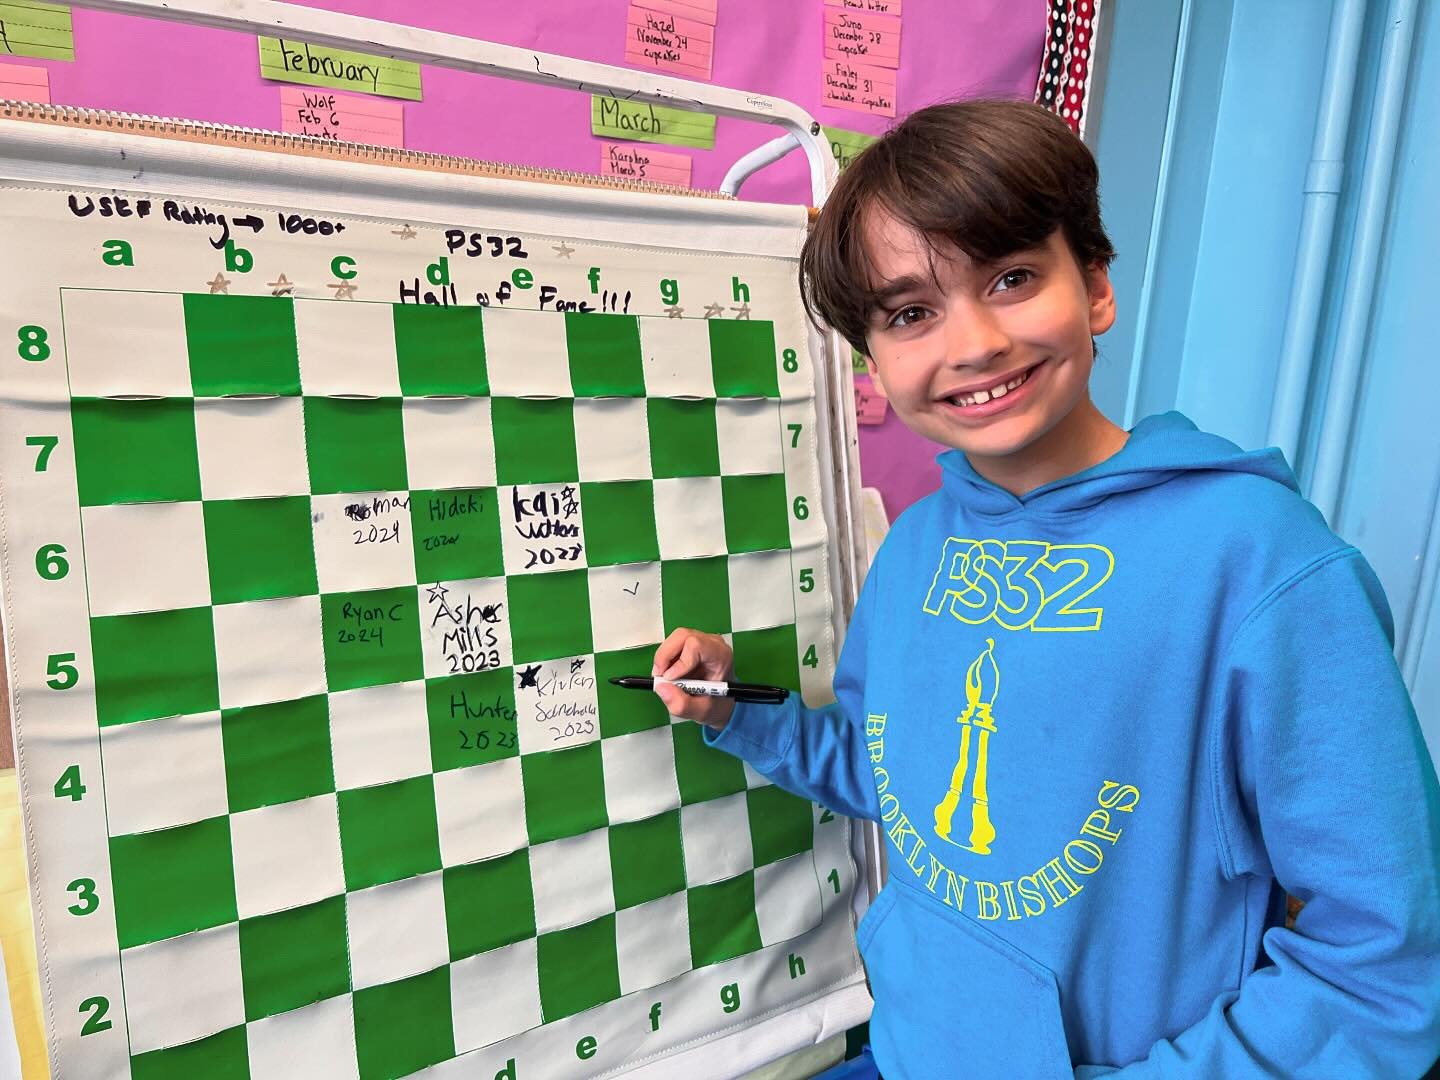 Make way for the newest 2-star general at PS32 ⭐️⭐️

Congratulations Kieran for breaking 1400 USCF this past week at Spring Break camp. Kieran finished 6th individually in the K-6 Under 1400 section 

#1400plususcf #halloffame #ps32chess